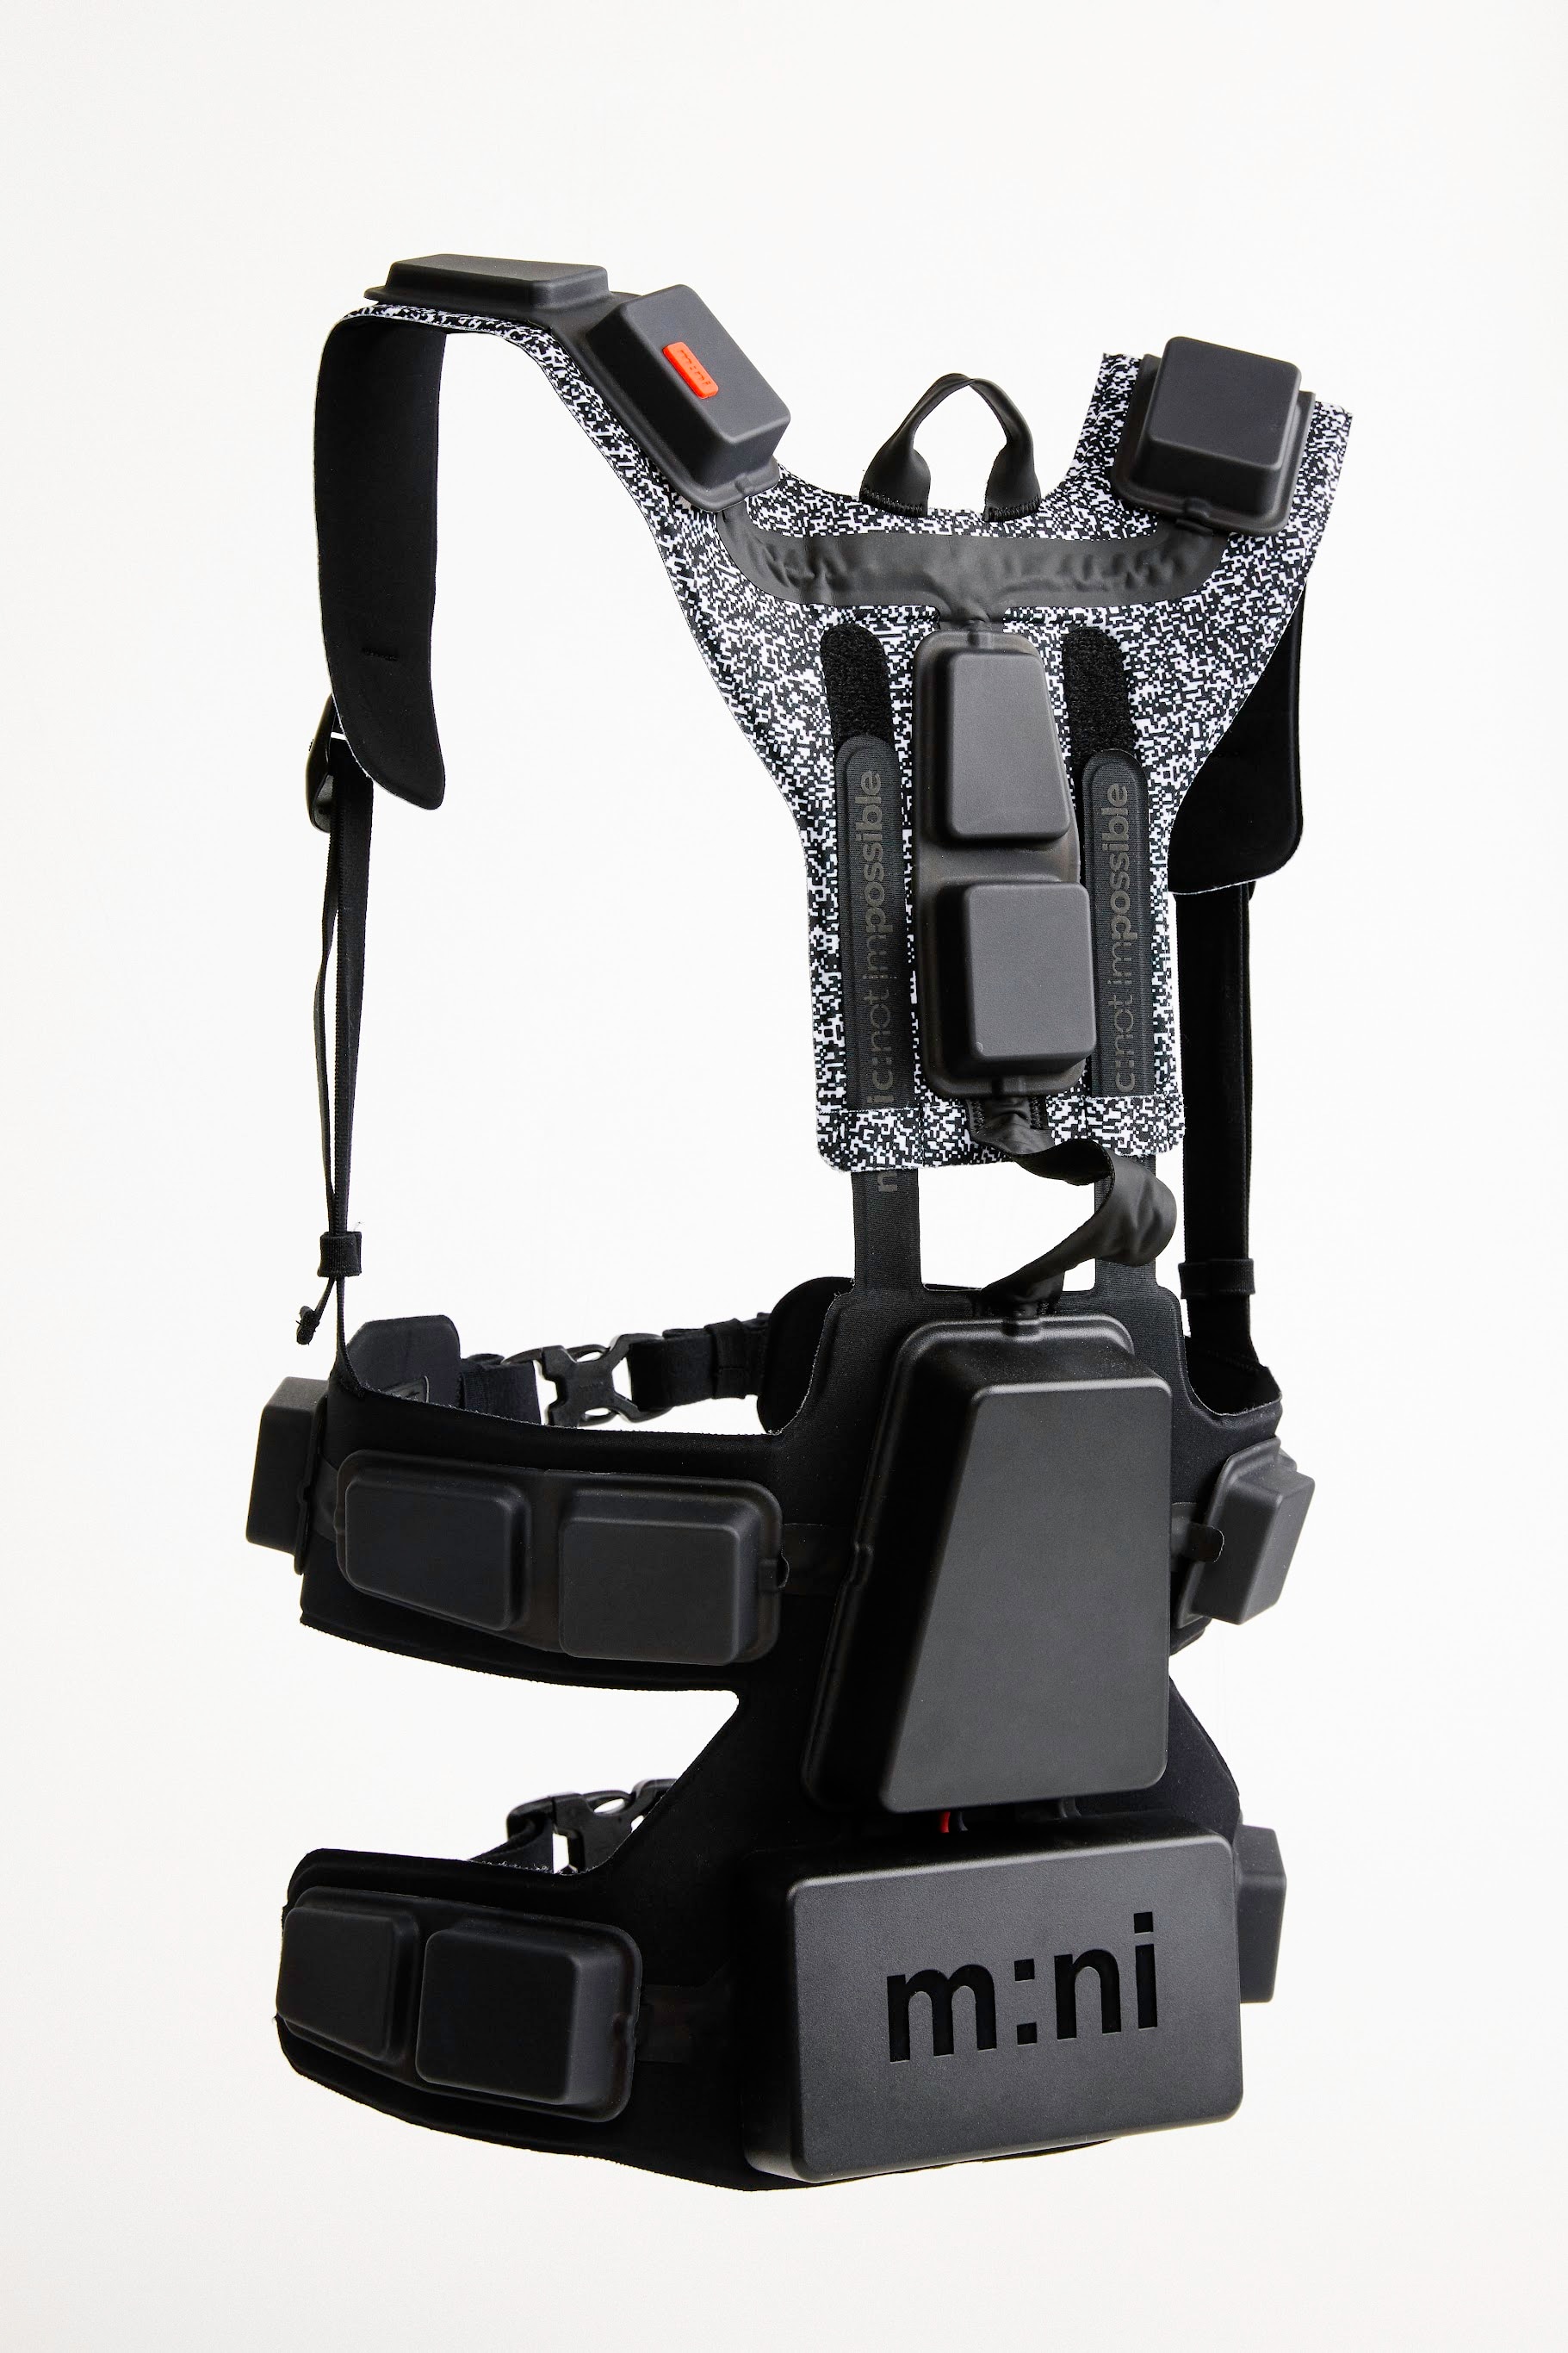 A generic photo of a futuristic-looking haptic vest, with black shoulder straps and a small black box attached at the back.